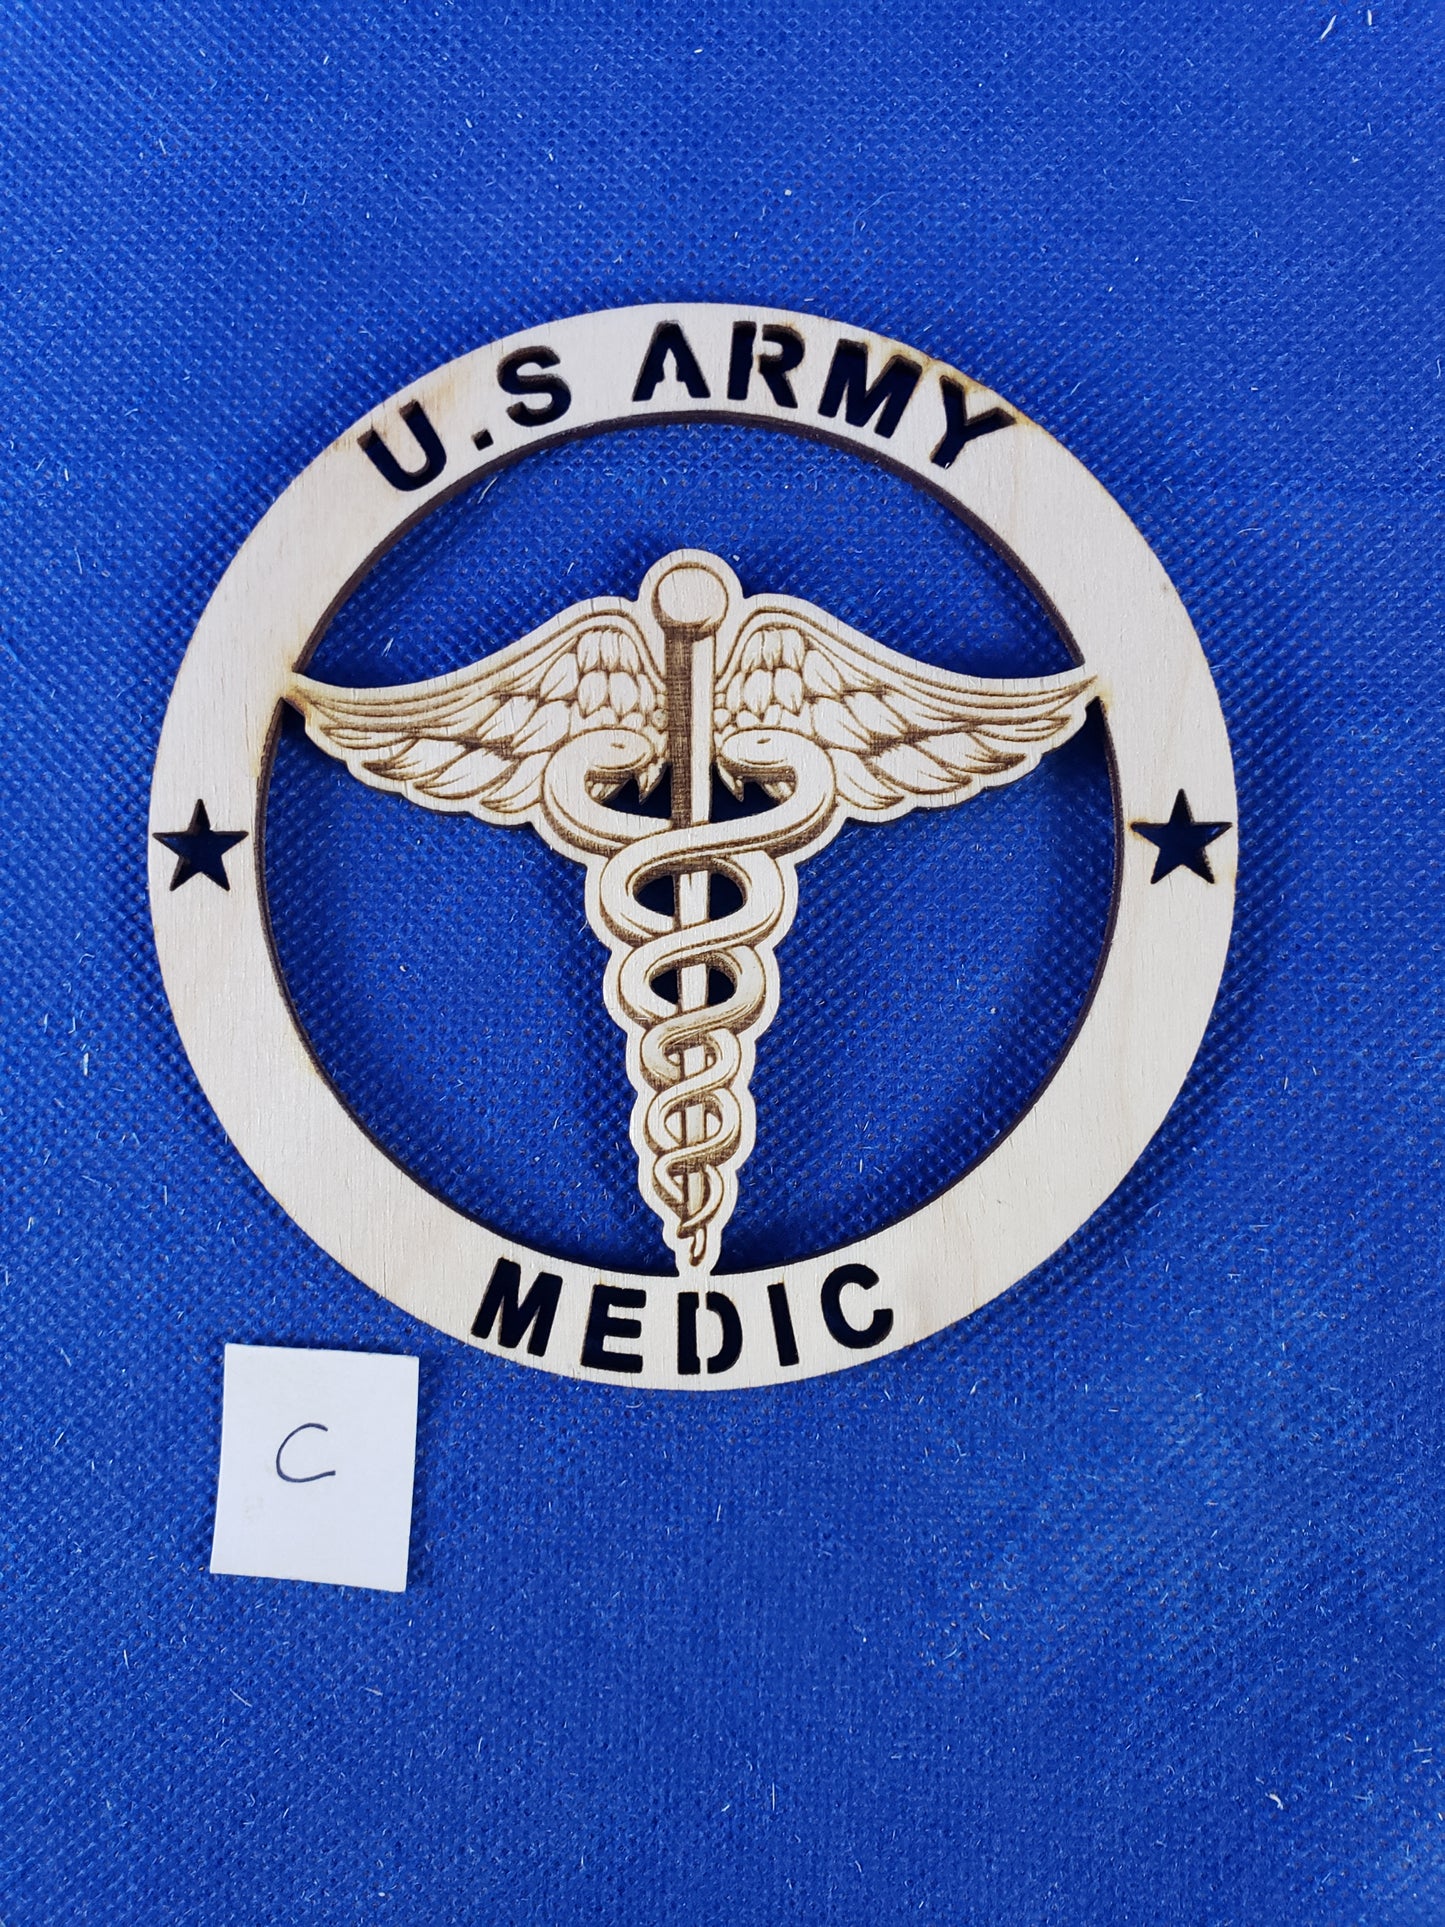 US Army Medic - Laser cut natural wooden blanks